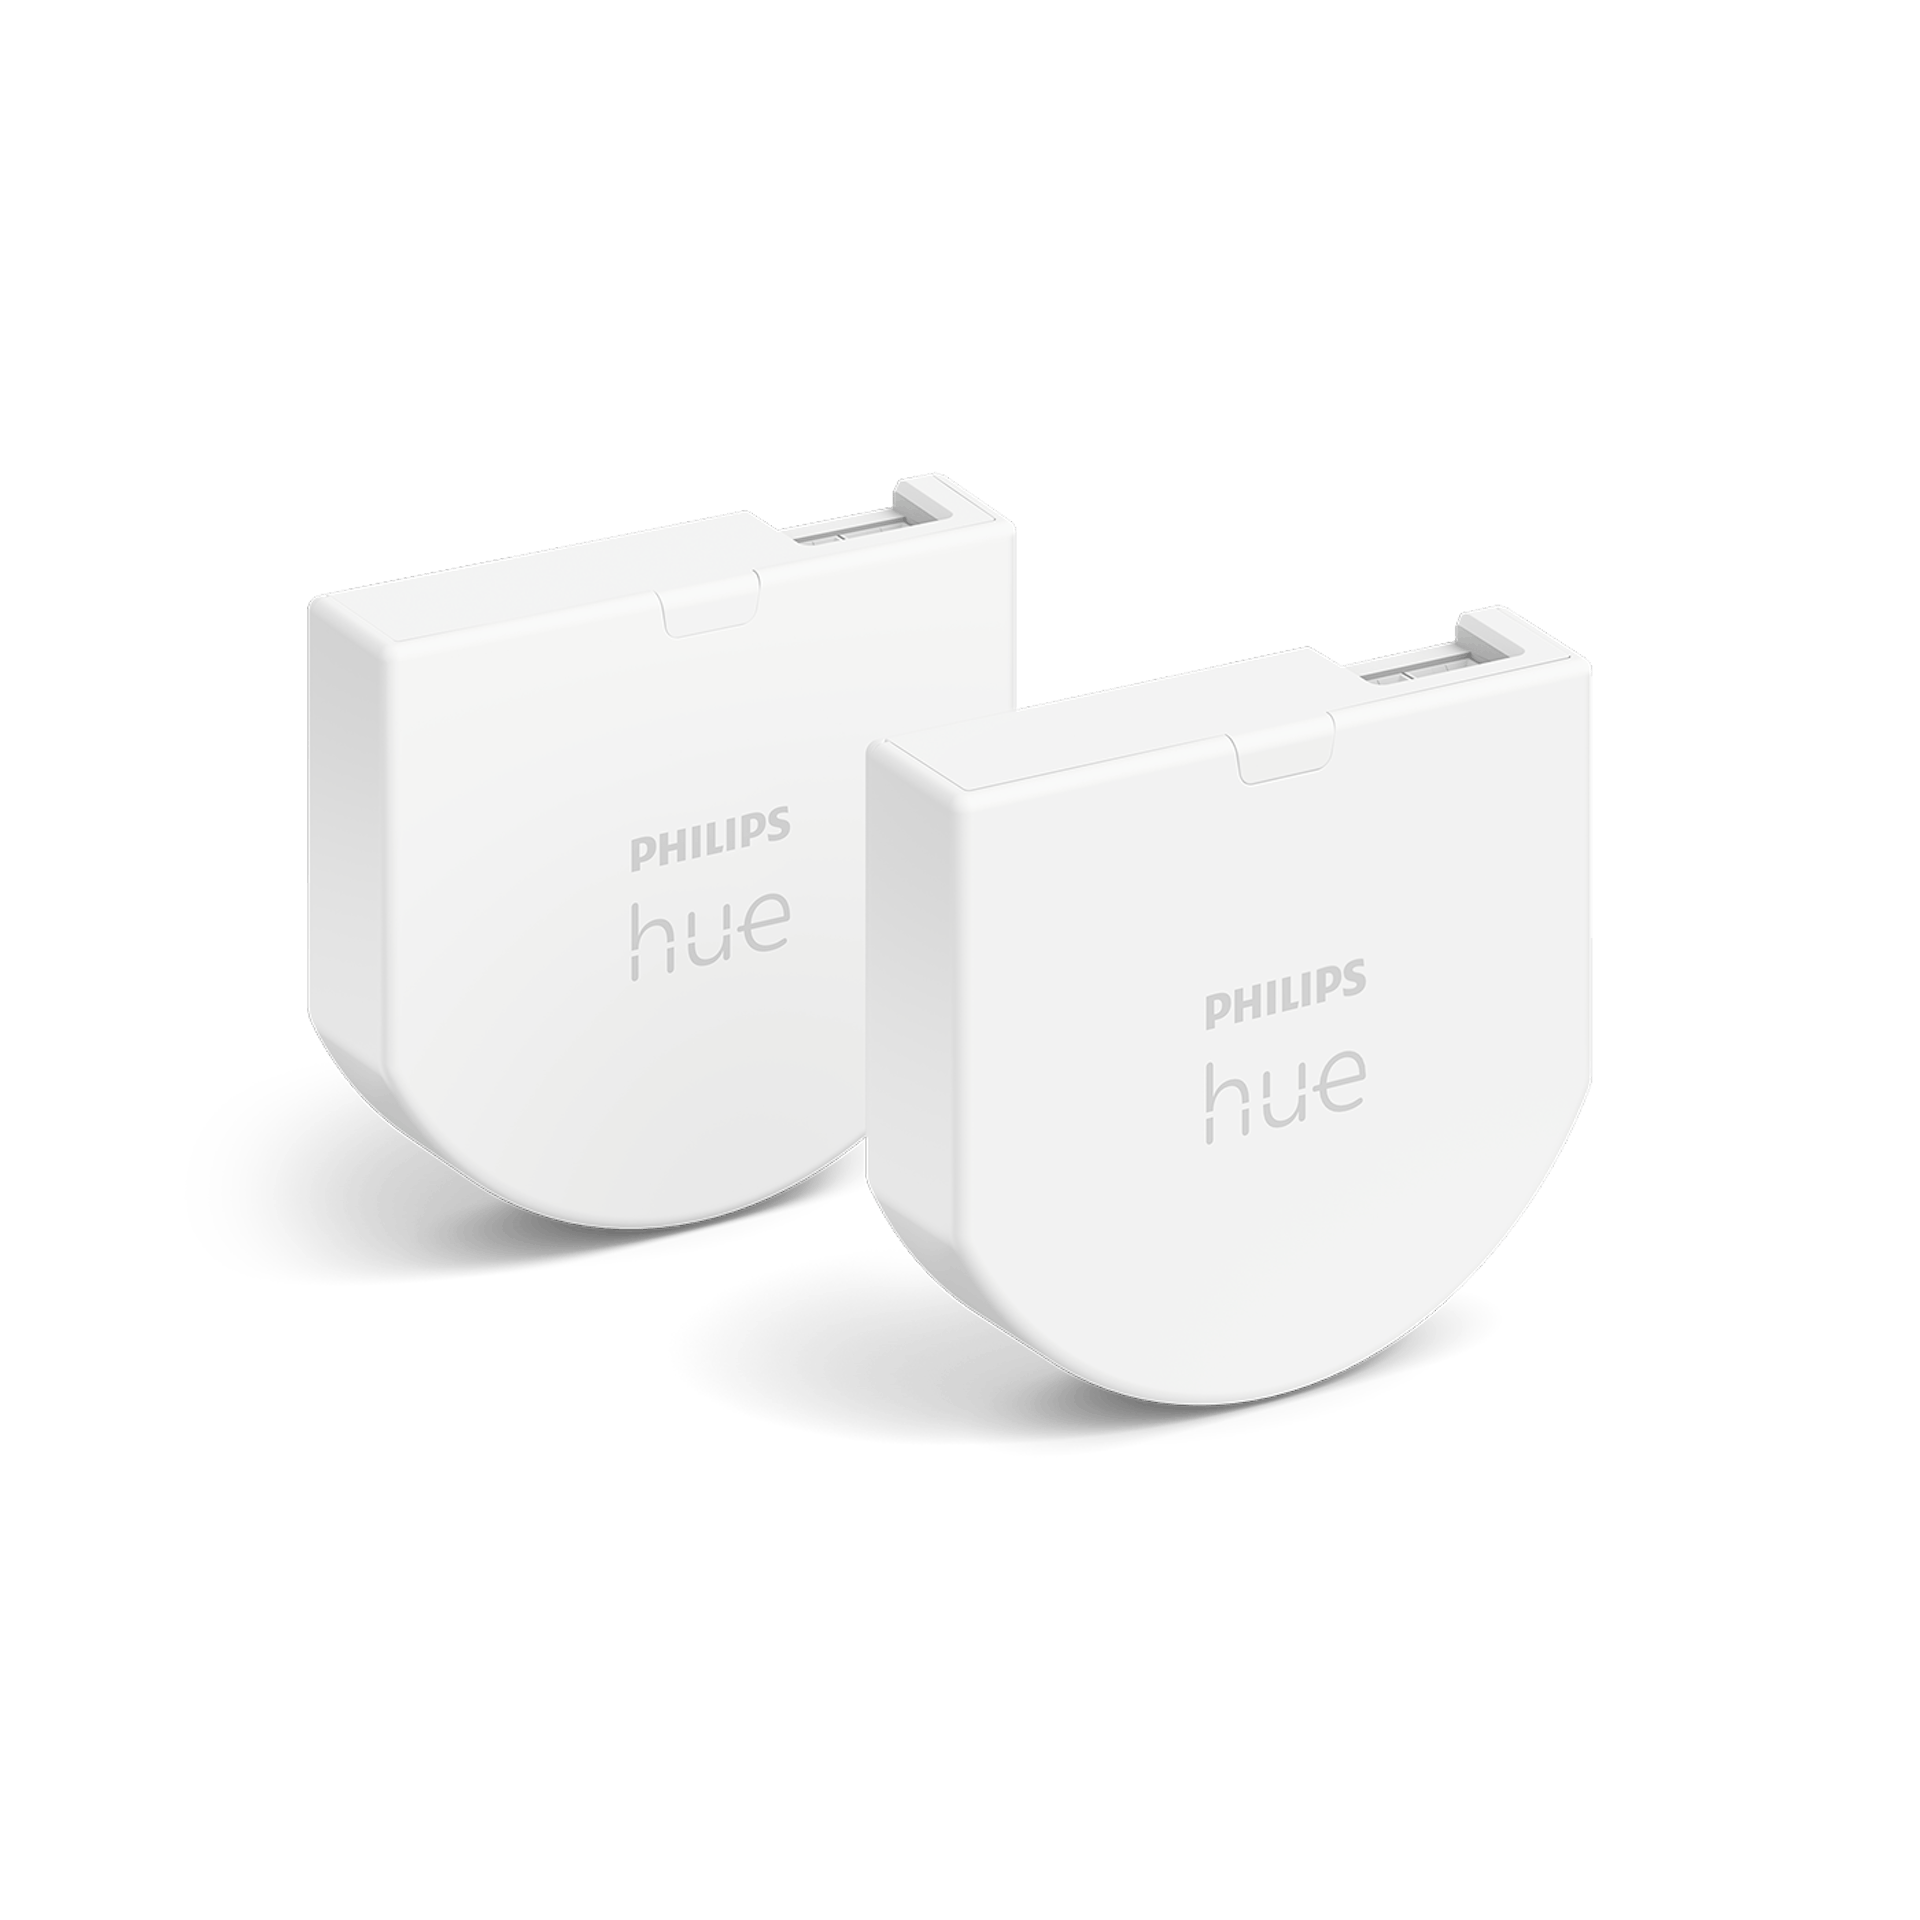 Philips Hue – Wall Switch Module (2-pack)